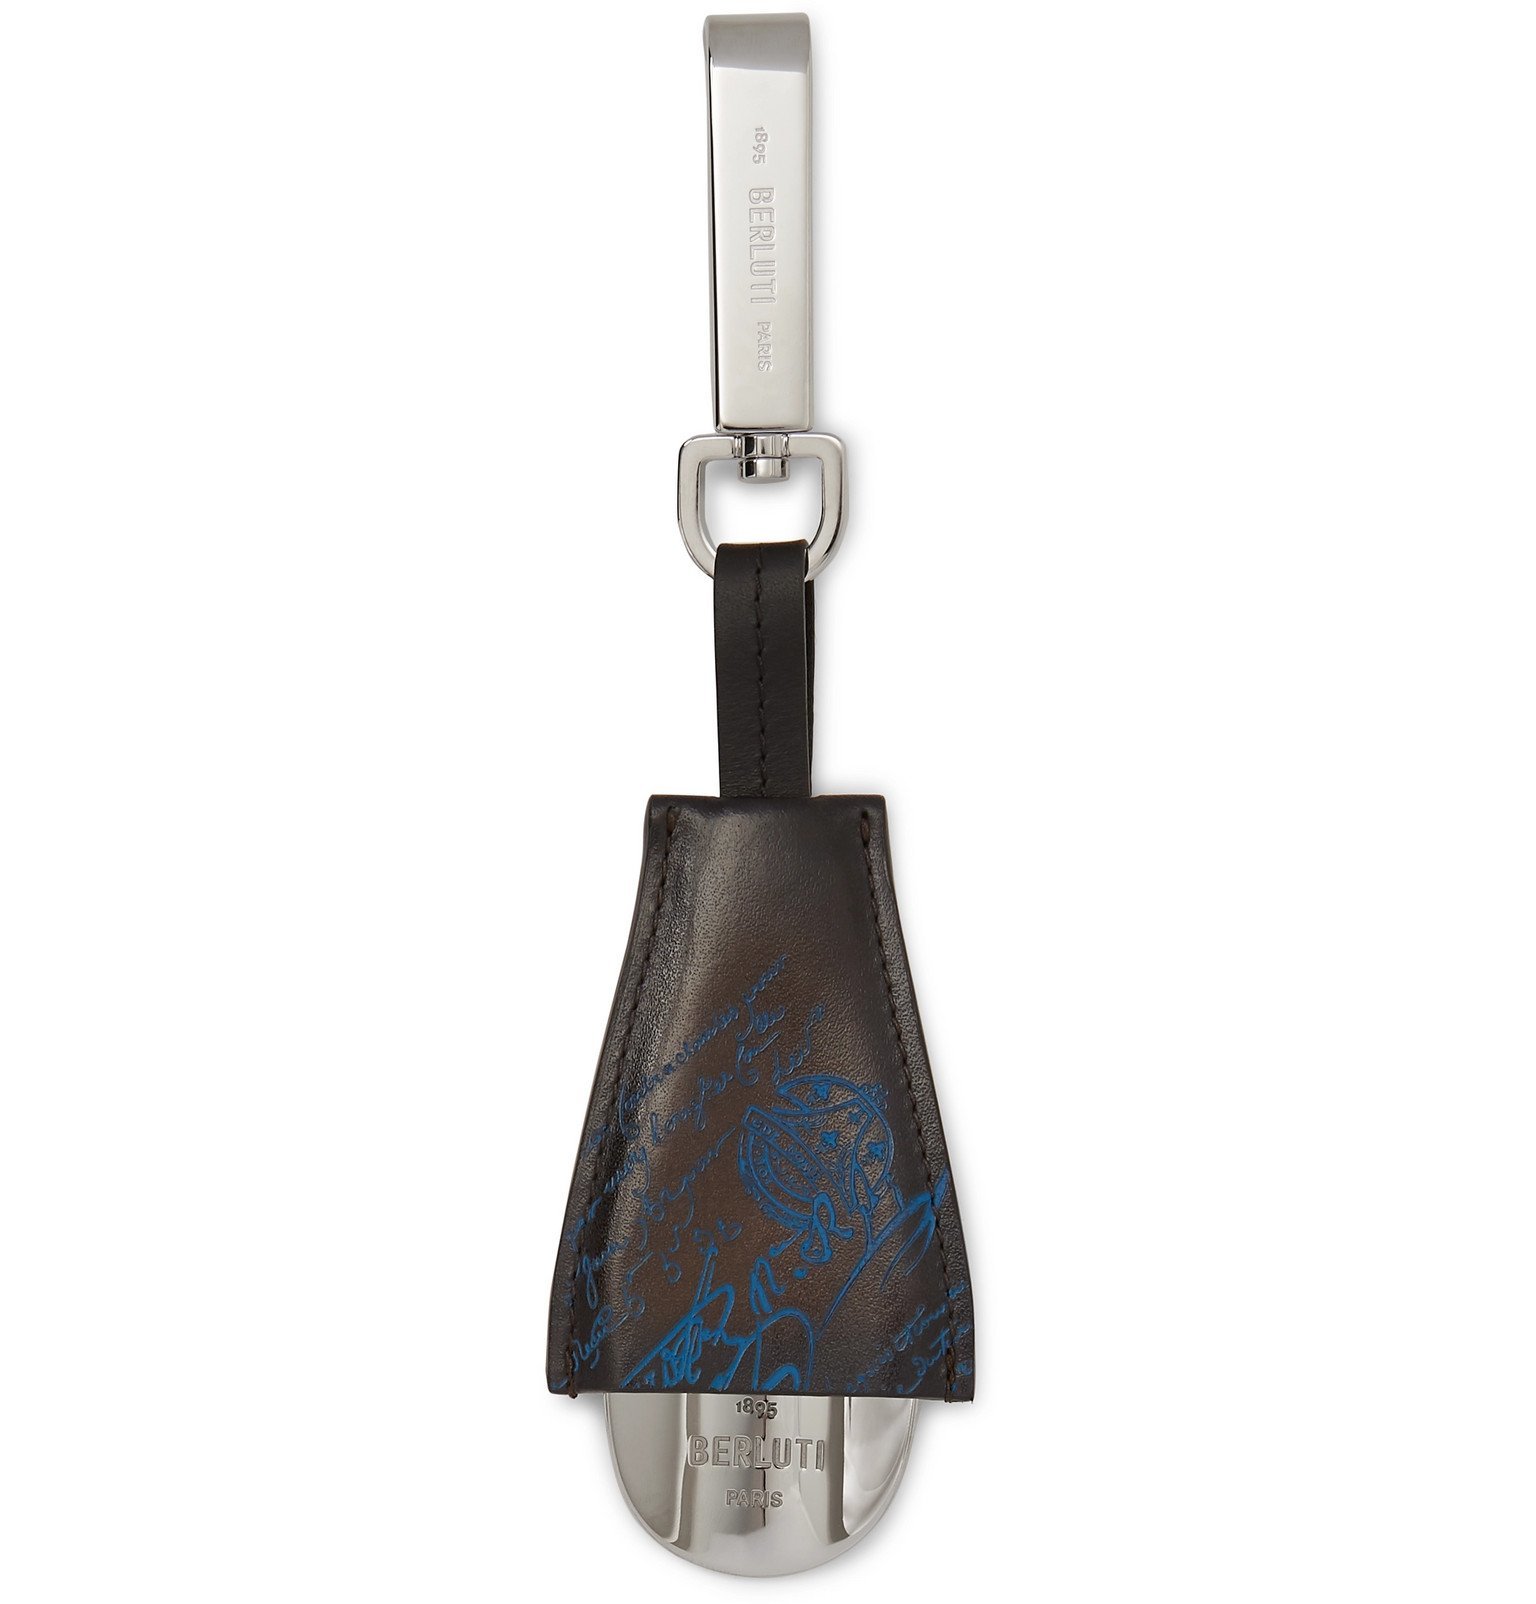 Berluti - Scritto Leather and Stainless Steel Shoehorn Fob - Silver Berluti